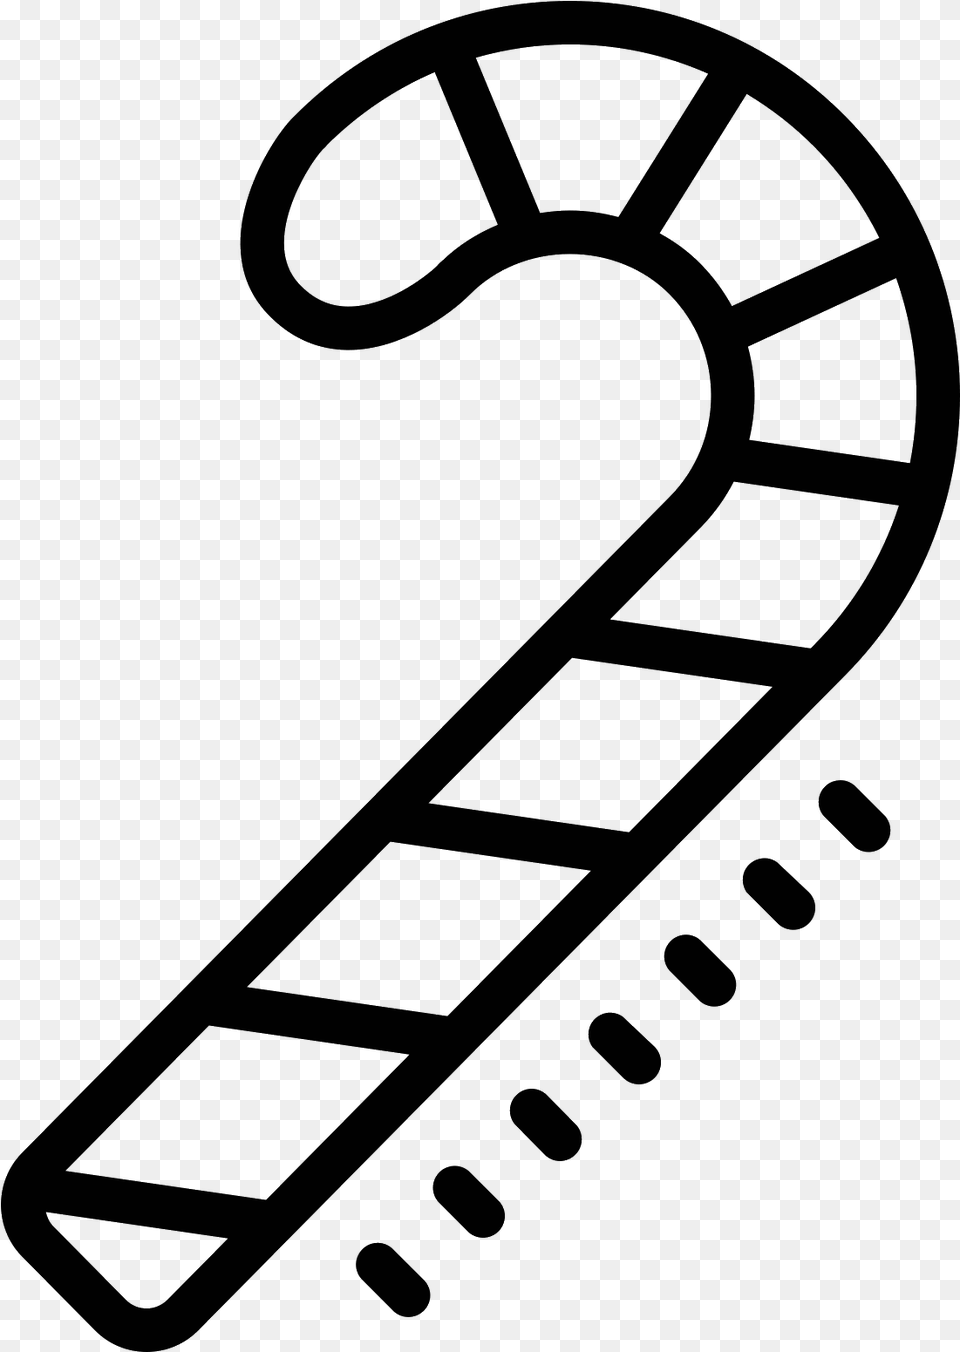 A Candy Cane The Universal Sign For Christmas Black White Candy Cane, Gray Png